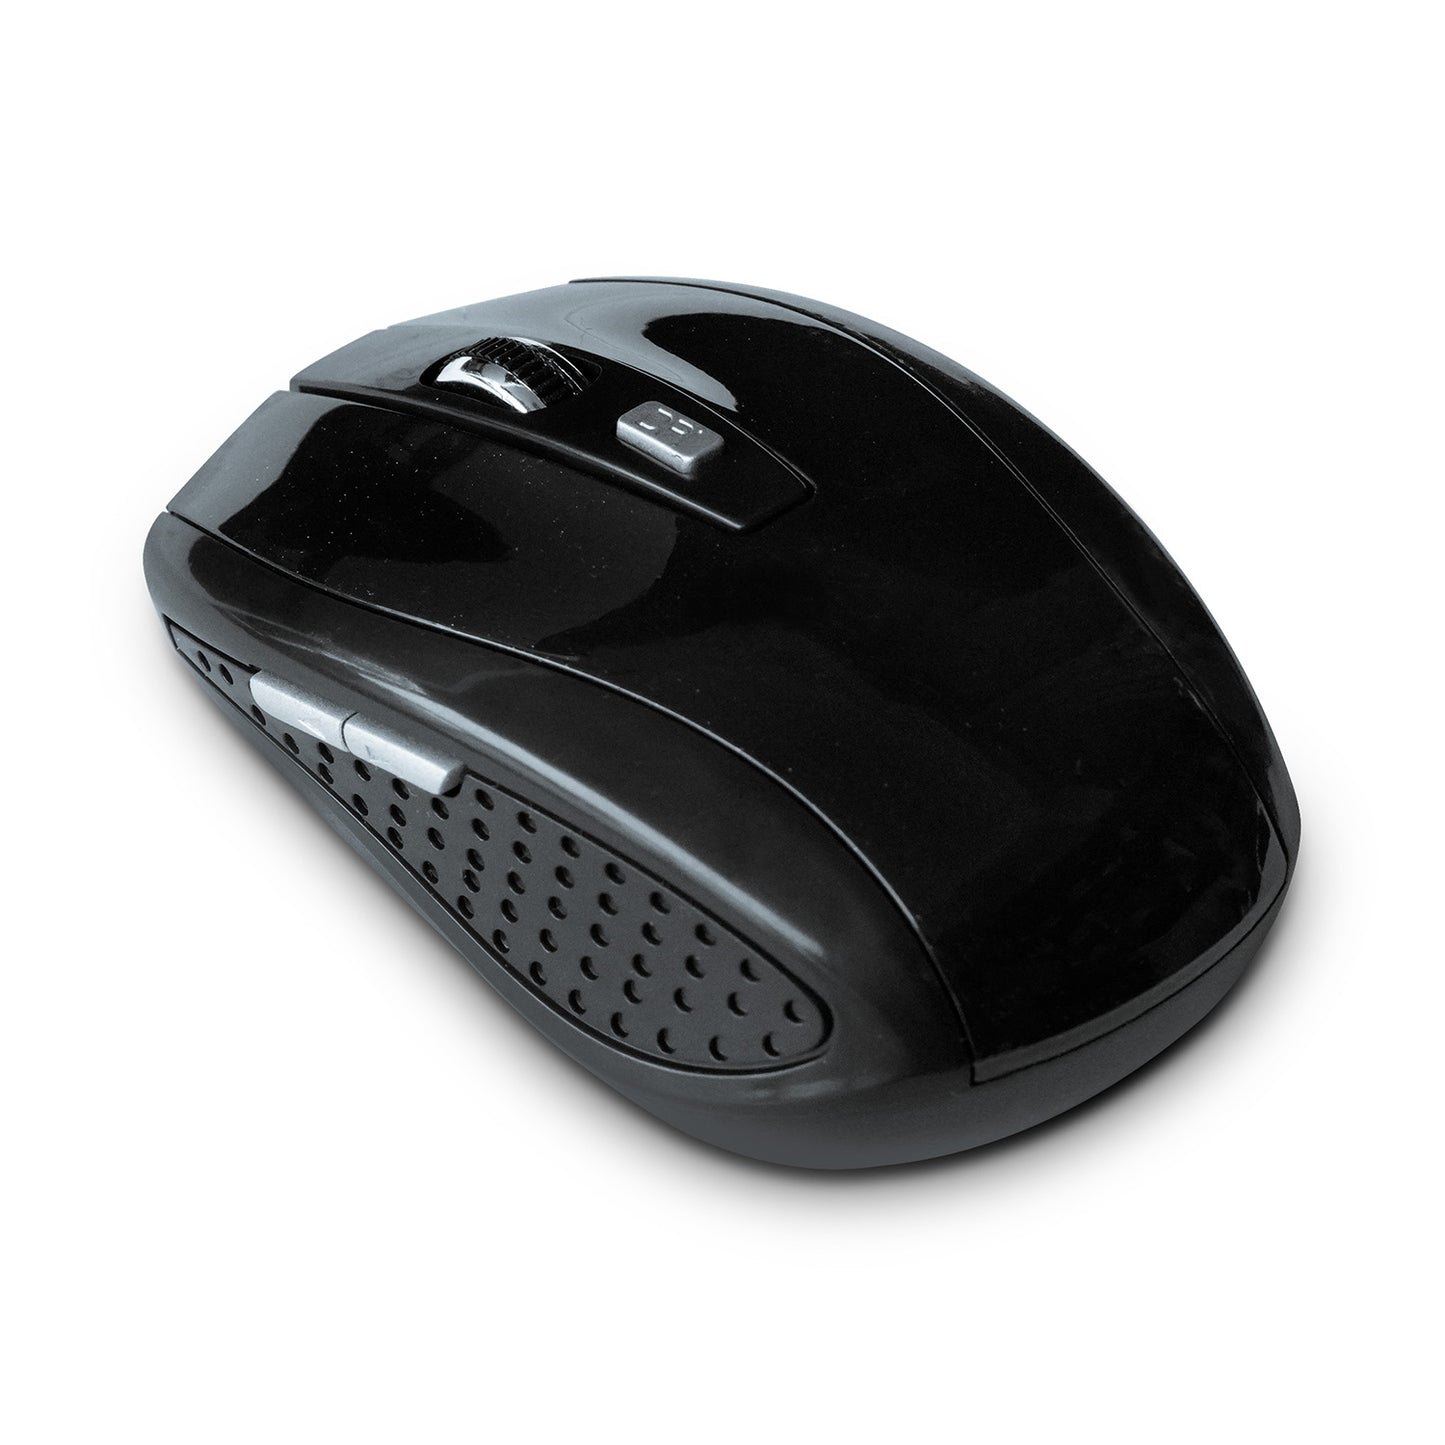 Selectable DPI Mouse